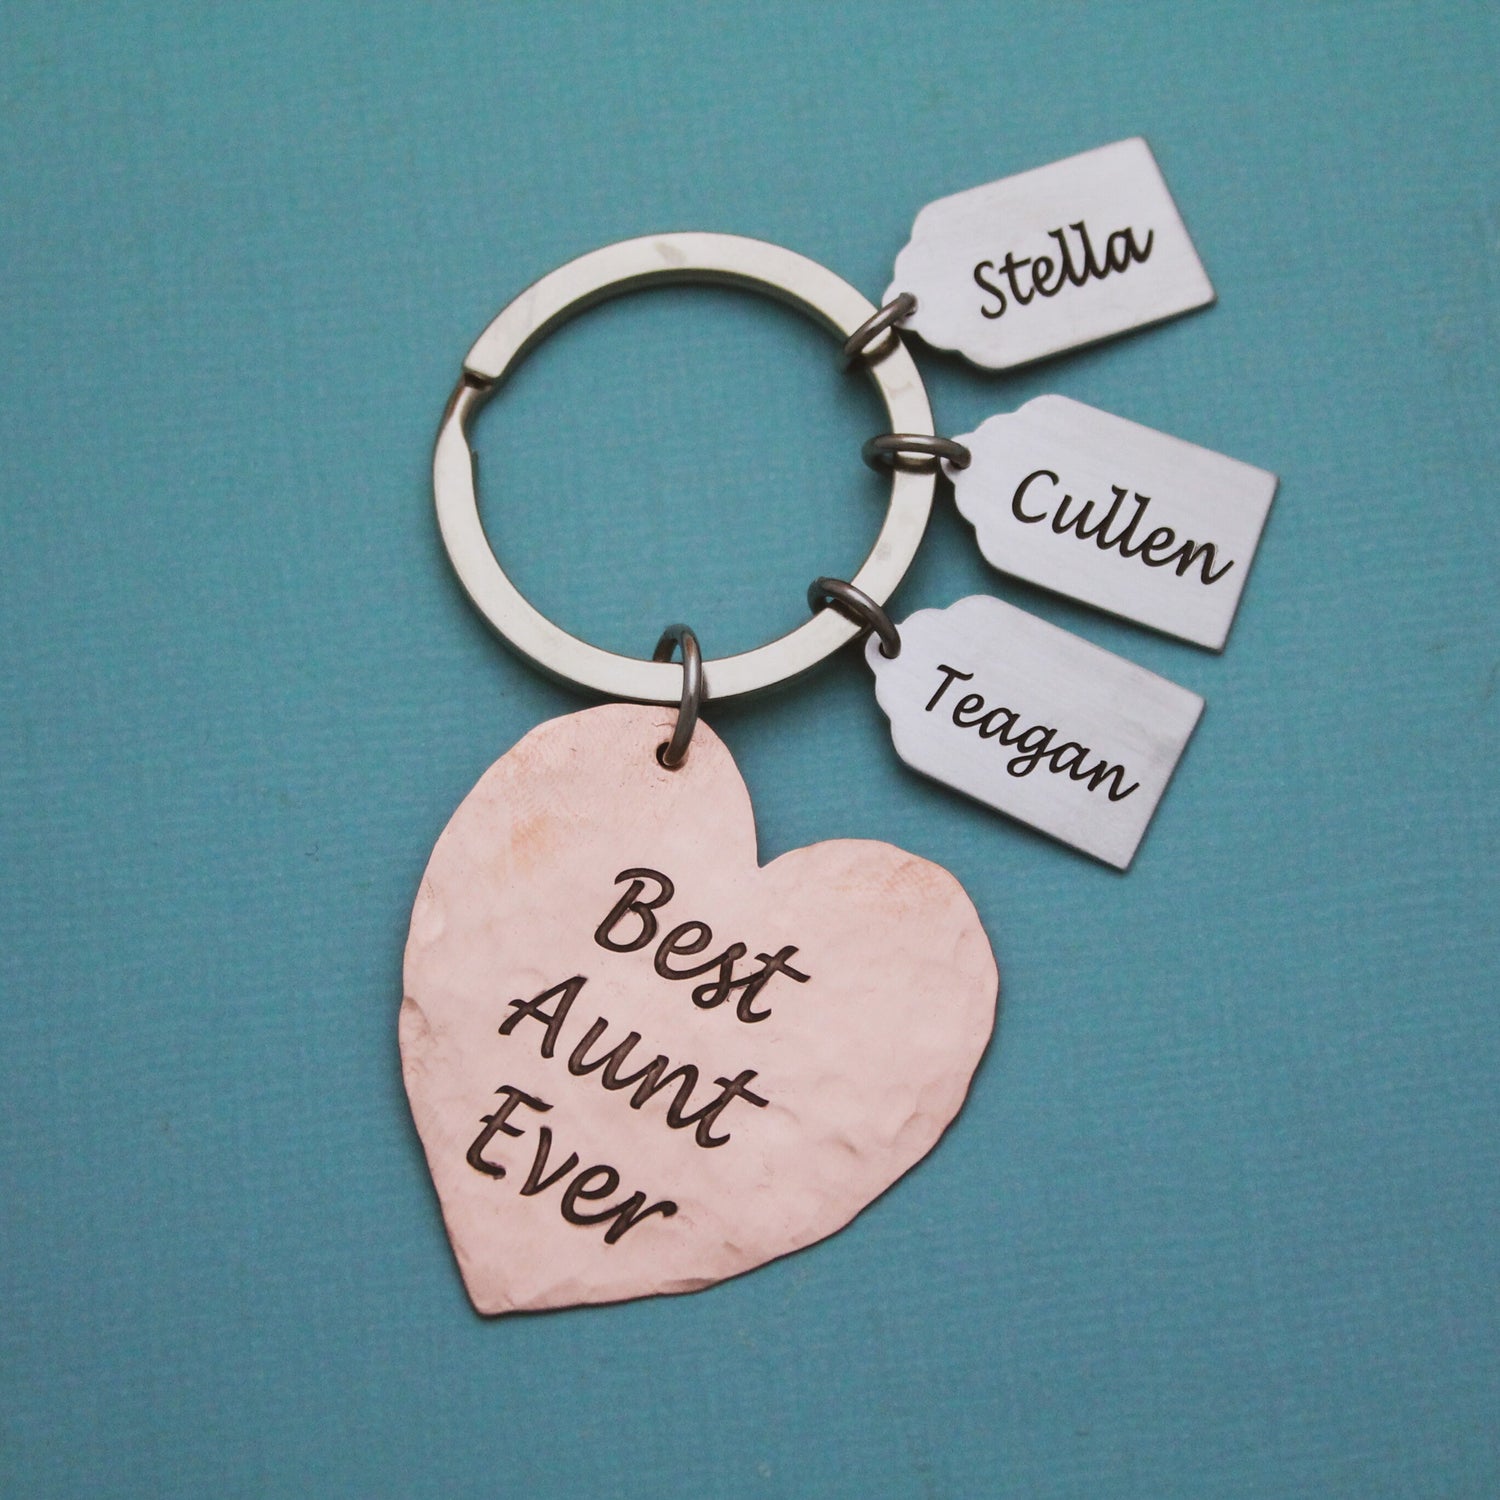 Best Aunt Ever Keychain, Custom Aunt Tia Heart Keychain, Gift for Her, Auntie Titi Gift, Personalized Gift, Keychain Purse Charm for Aunt